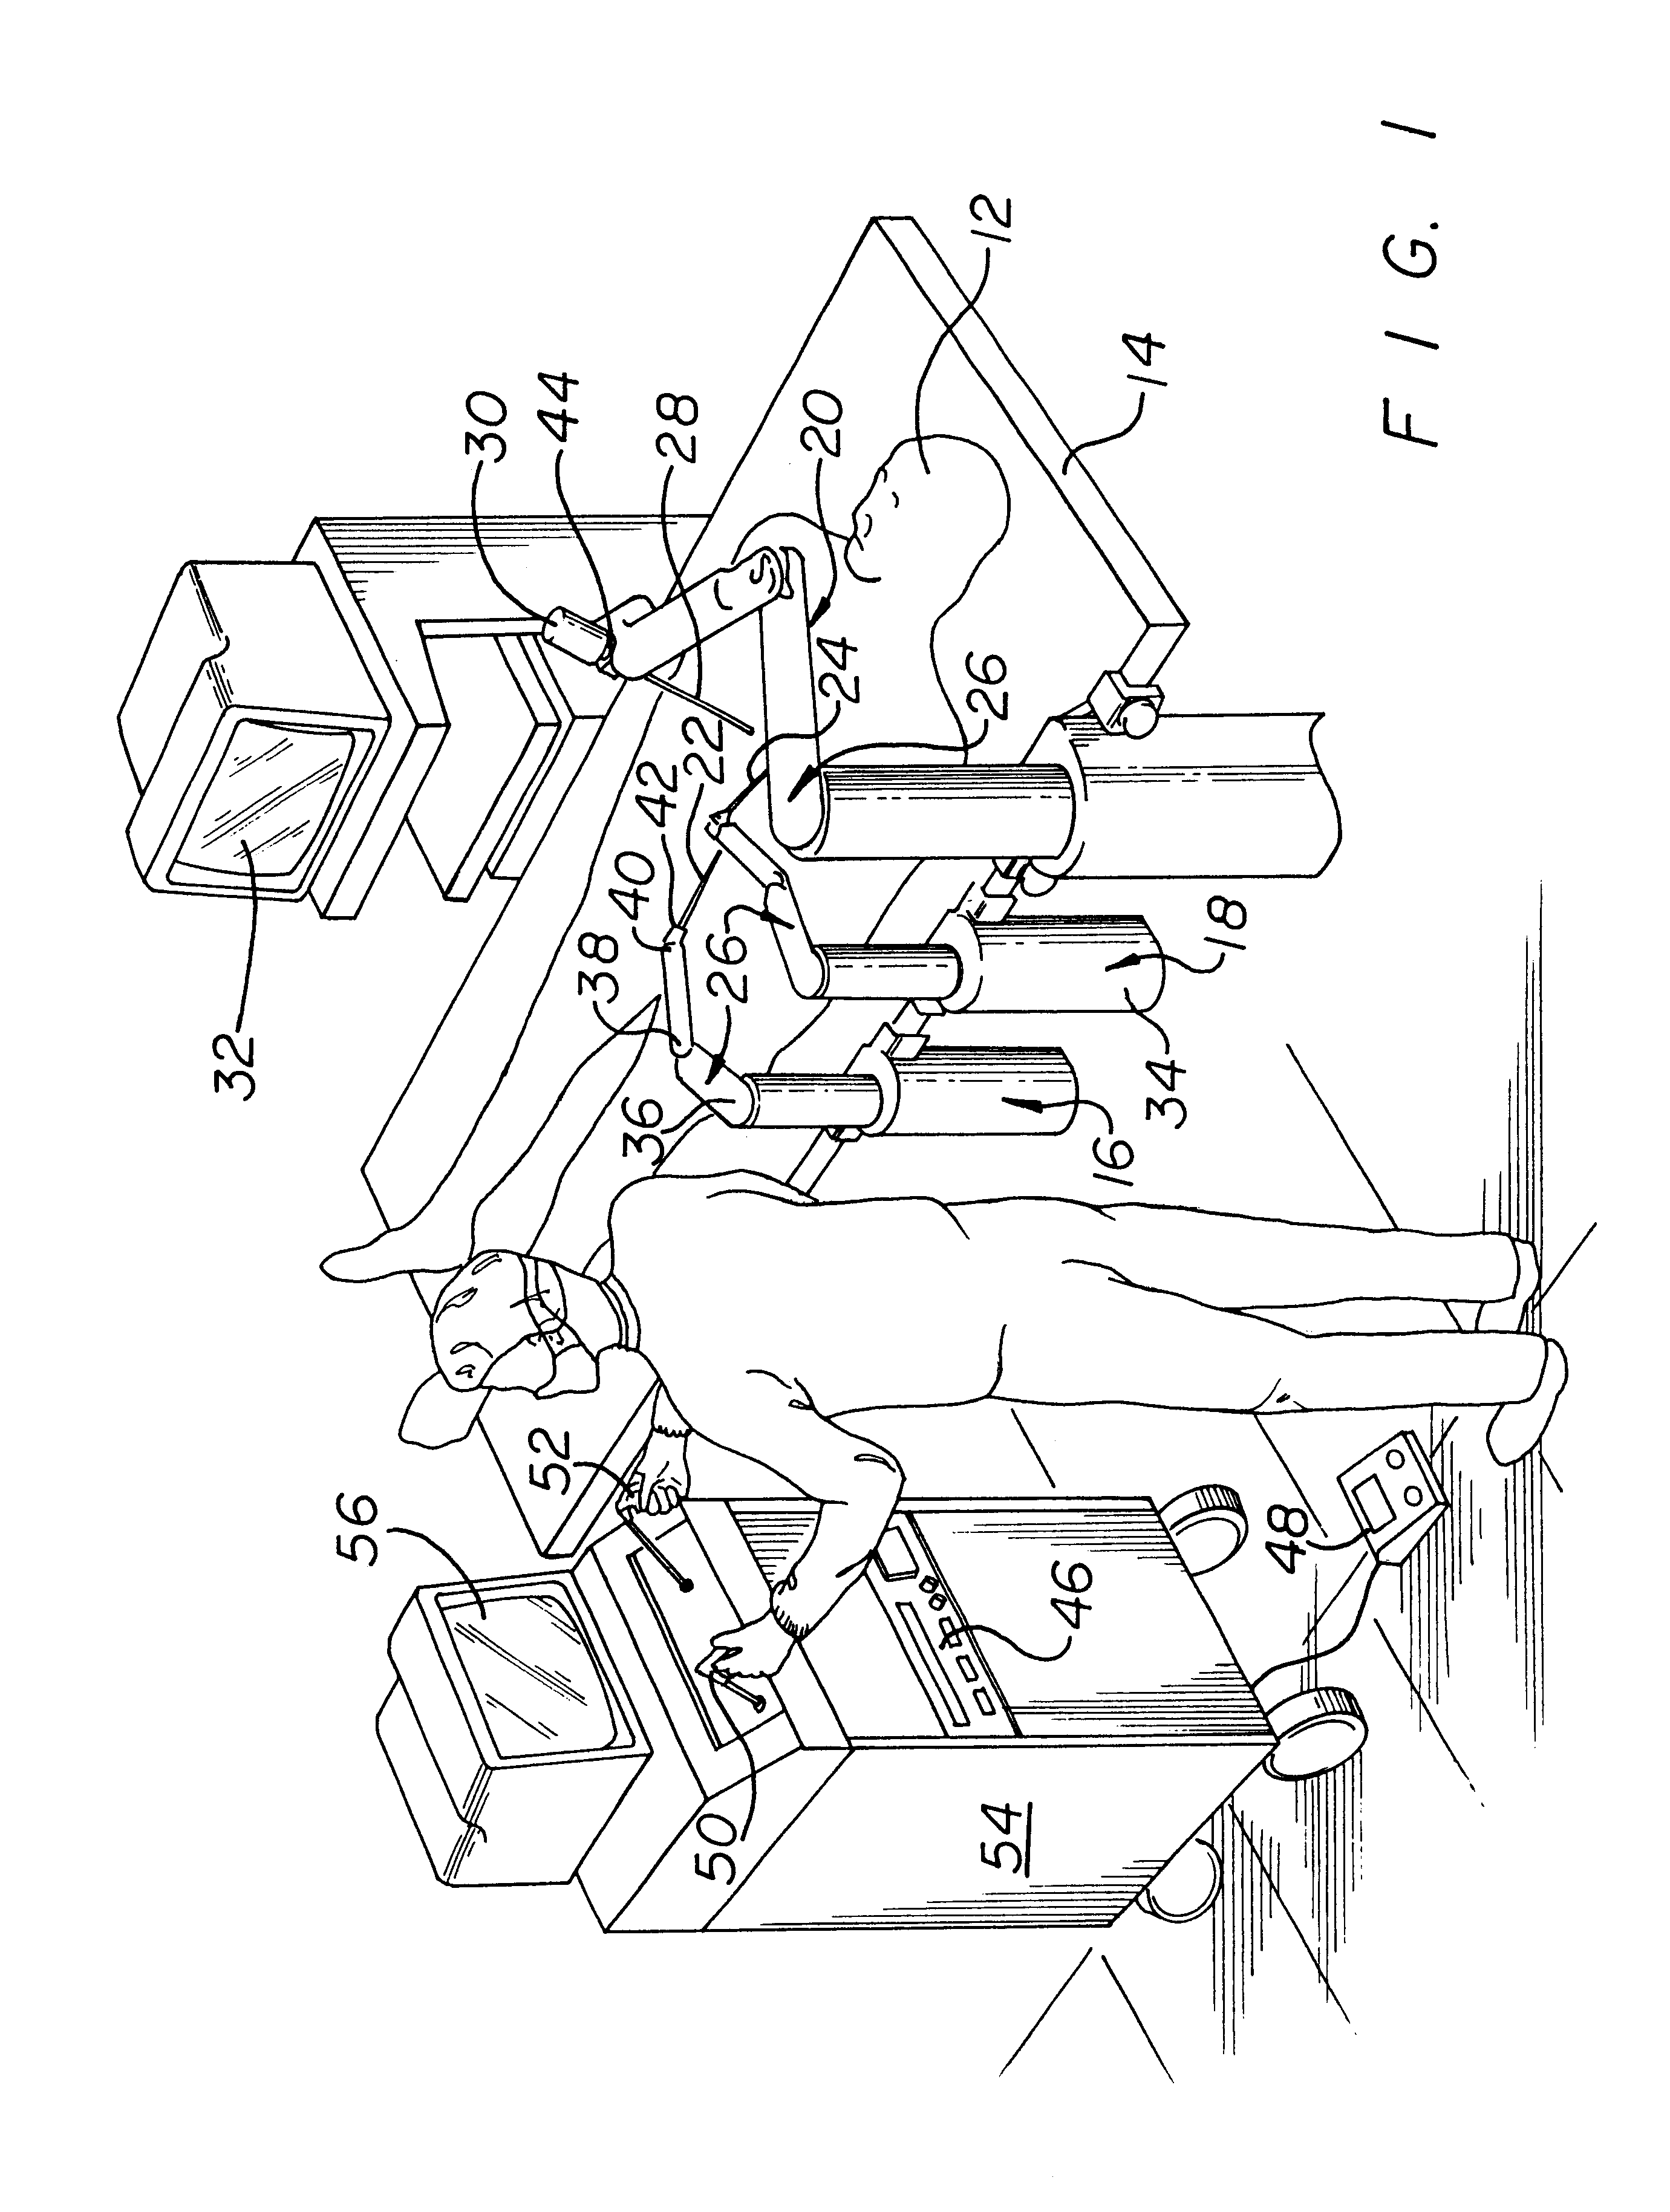 Apparatus for performing minimally invasive cardiac procedures with a robotic arm that has a passive joint and system which can decouple the robotic arm from the input device